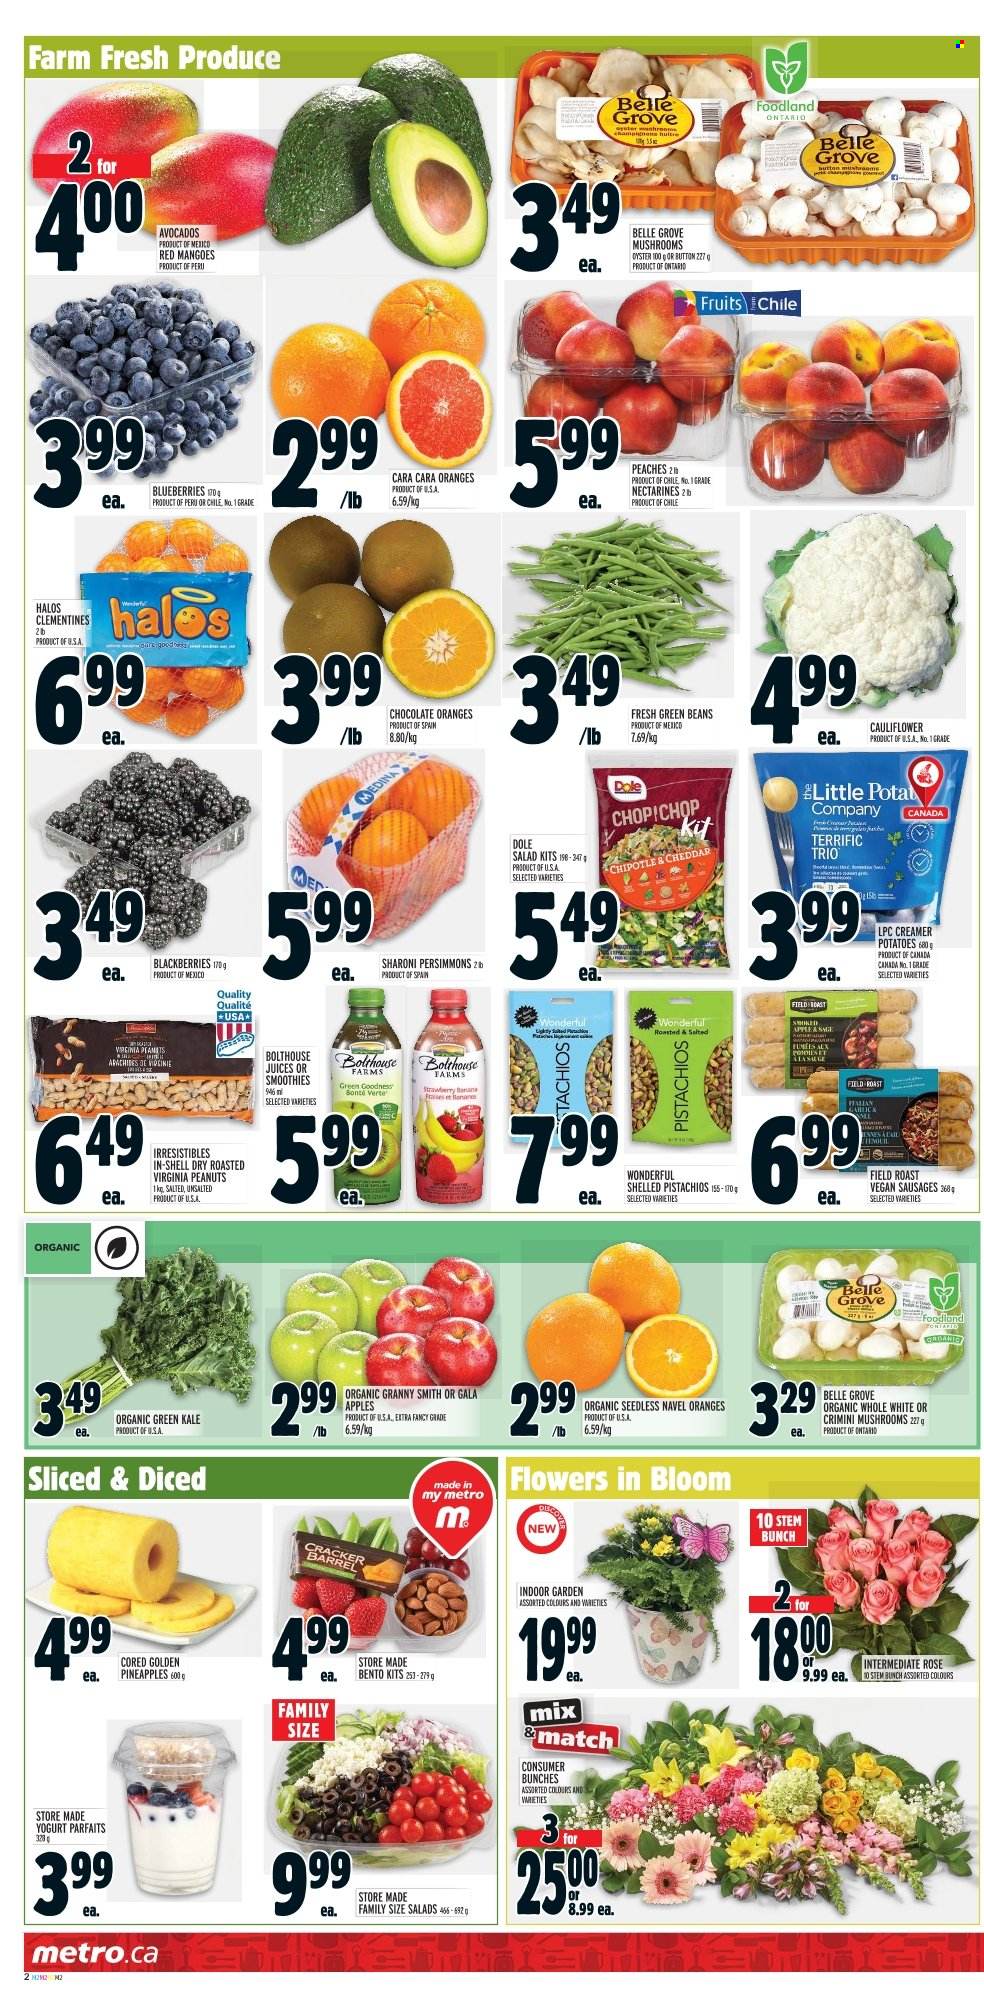 thumbnail - Metro Flyer - January 26, 2023 - February 01, 2023 - Sales products - mushrooms, beans, cauliflower, green beans, kale, potatoes, salad, Dole, avocado, blackberries, clementines, Gala, nectarines, strawberries, pineapple, persimmons, oranges, peaches, Granny Smith, navel oranges, oysters, sausage, cheese, yoghurt, chocolate, peanuts, pistachios, juice, rosé wine, bunches, rose. Page 2.